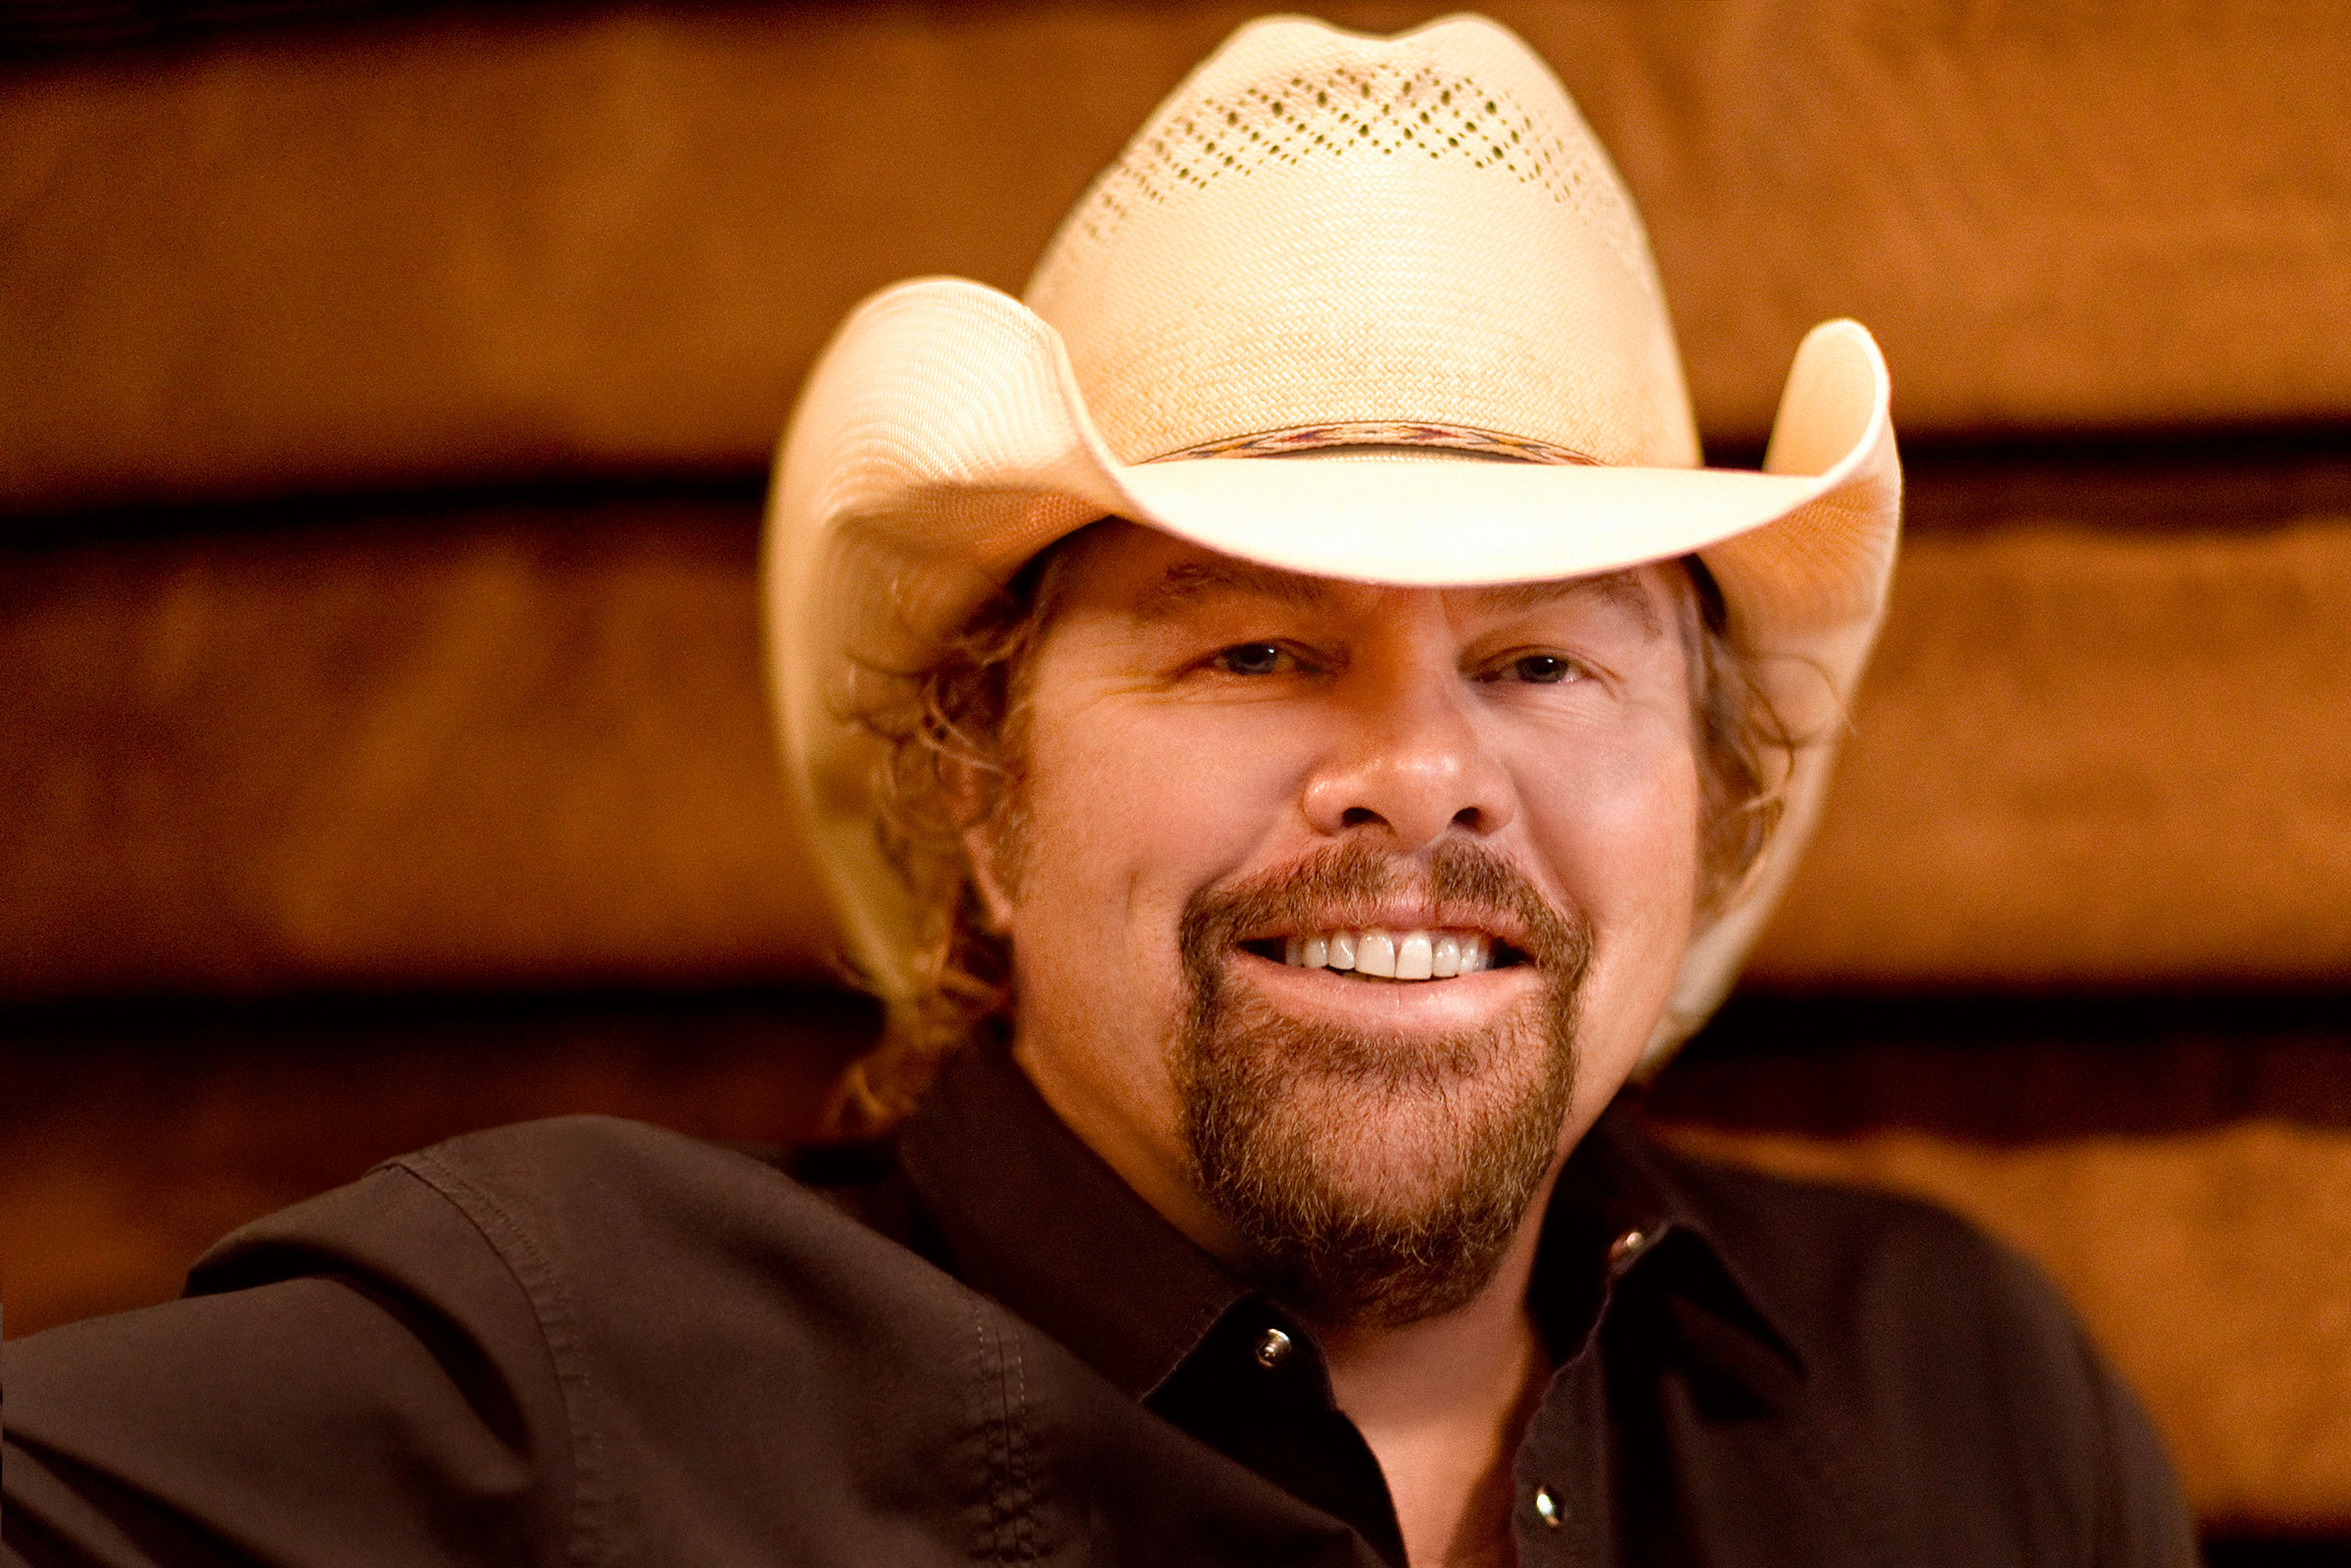 Toby Keith family: Know about his wife Tricia Lucus and their children